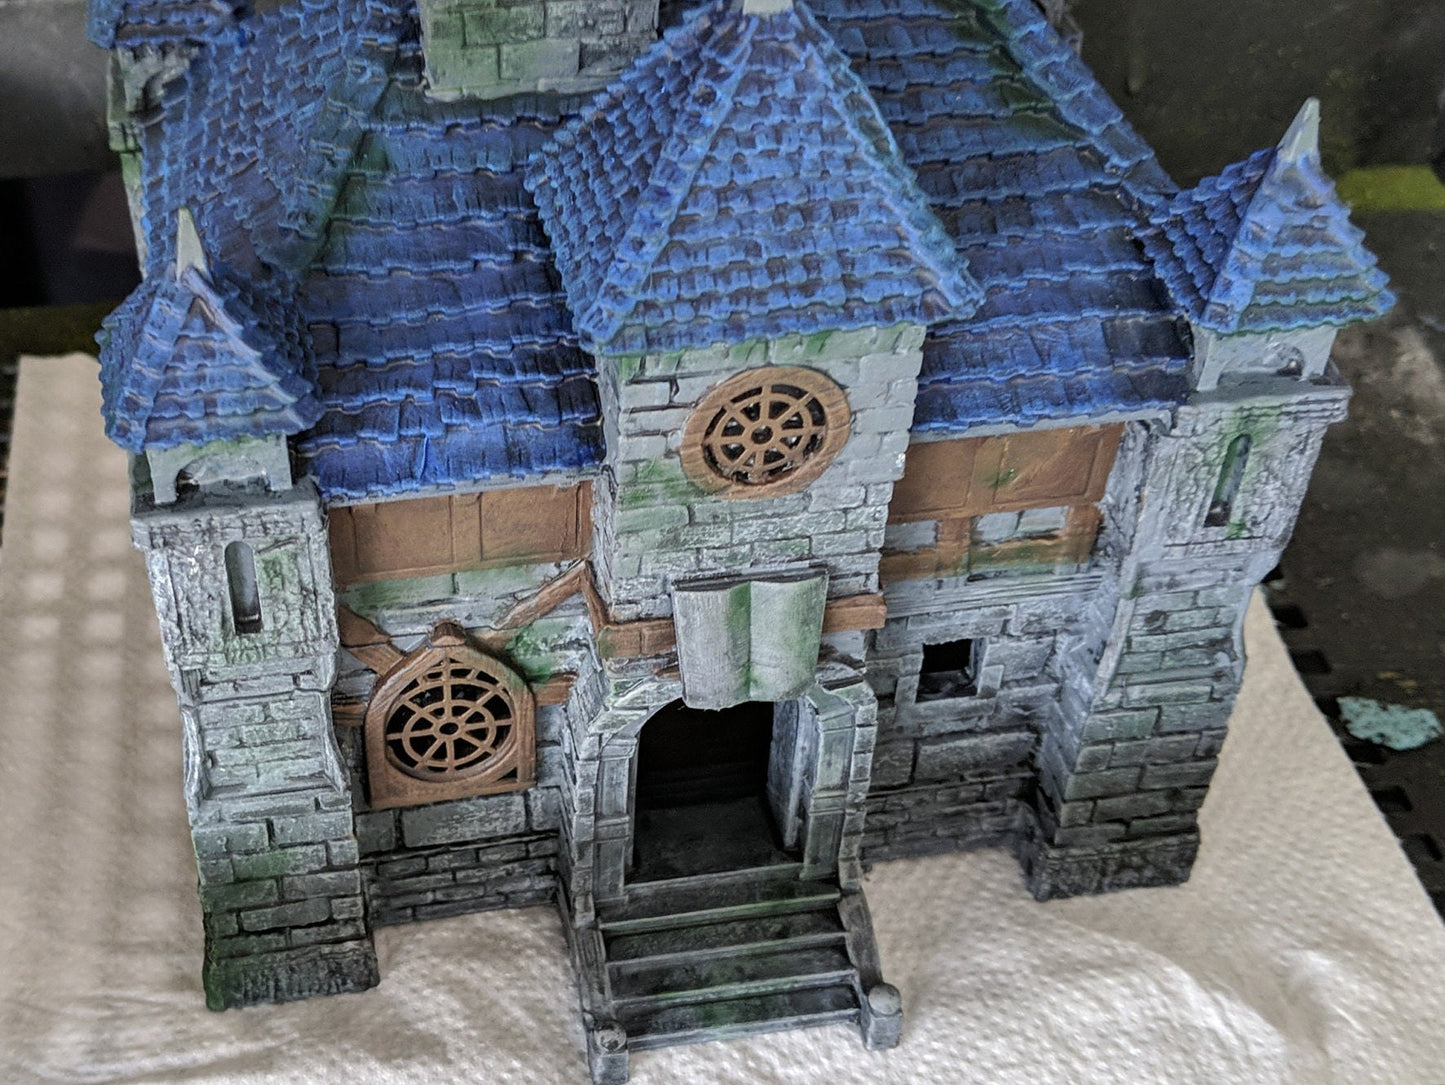 3D Printed Wizards Library with Playable interior for Dungeons and Dragons, Wargaming and Tabletop games. Age of Sigmar, DnD, Warhammer